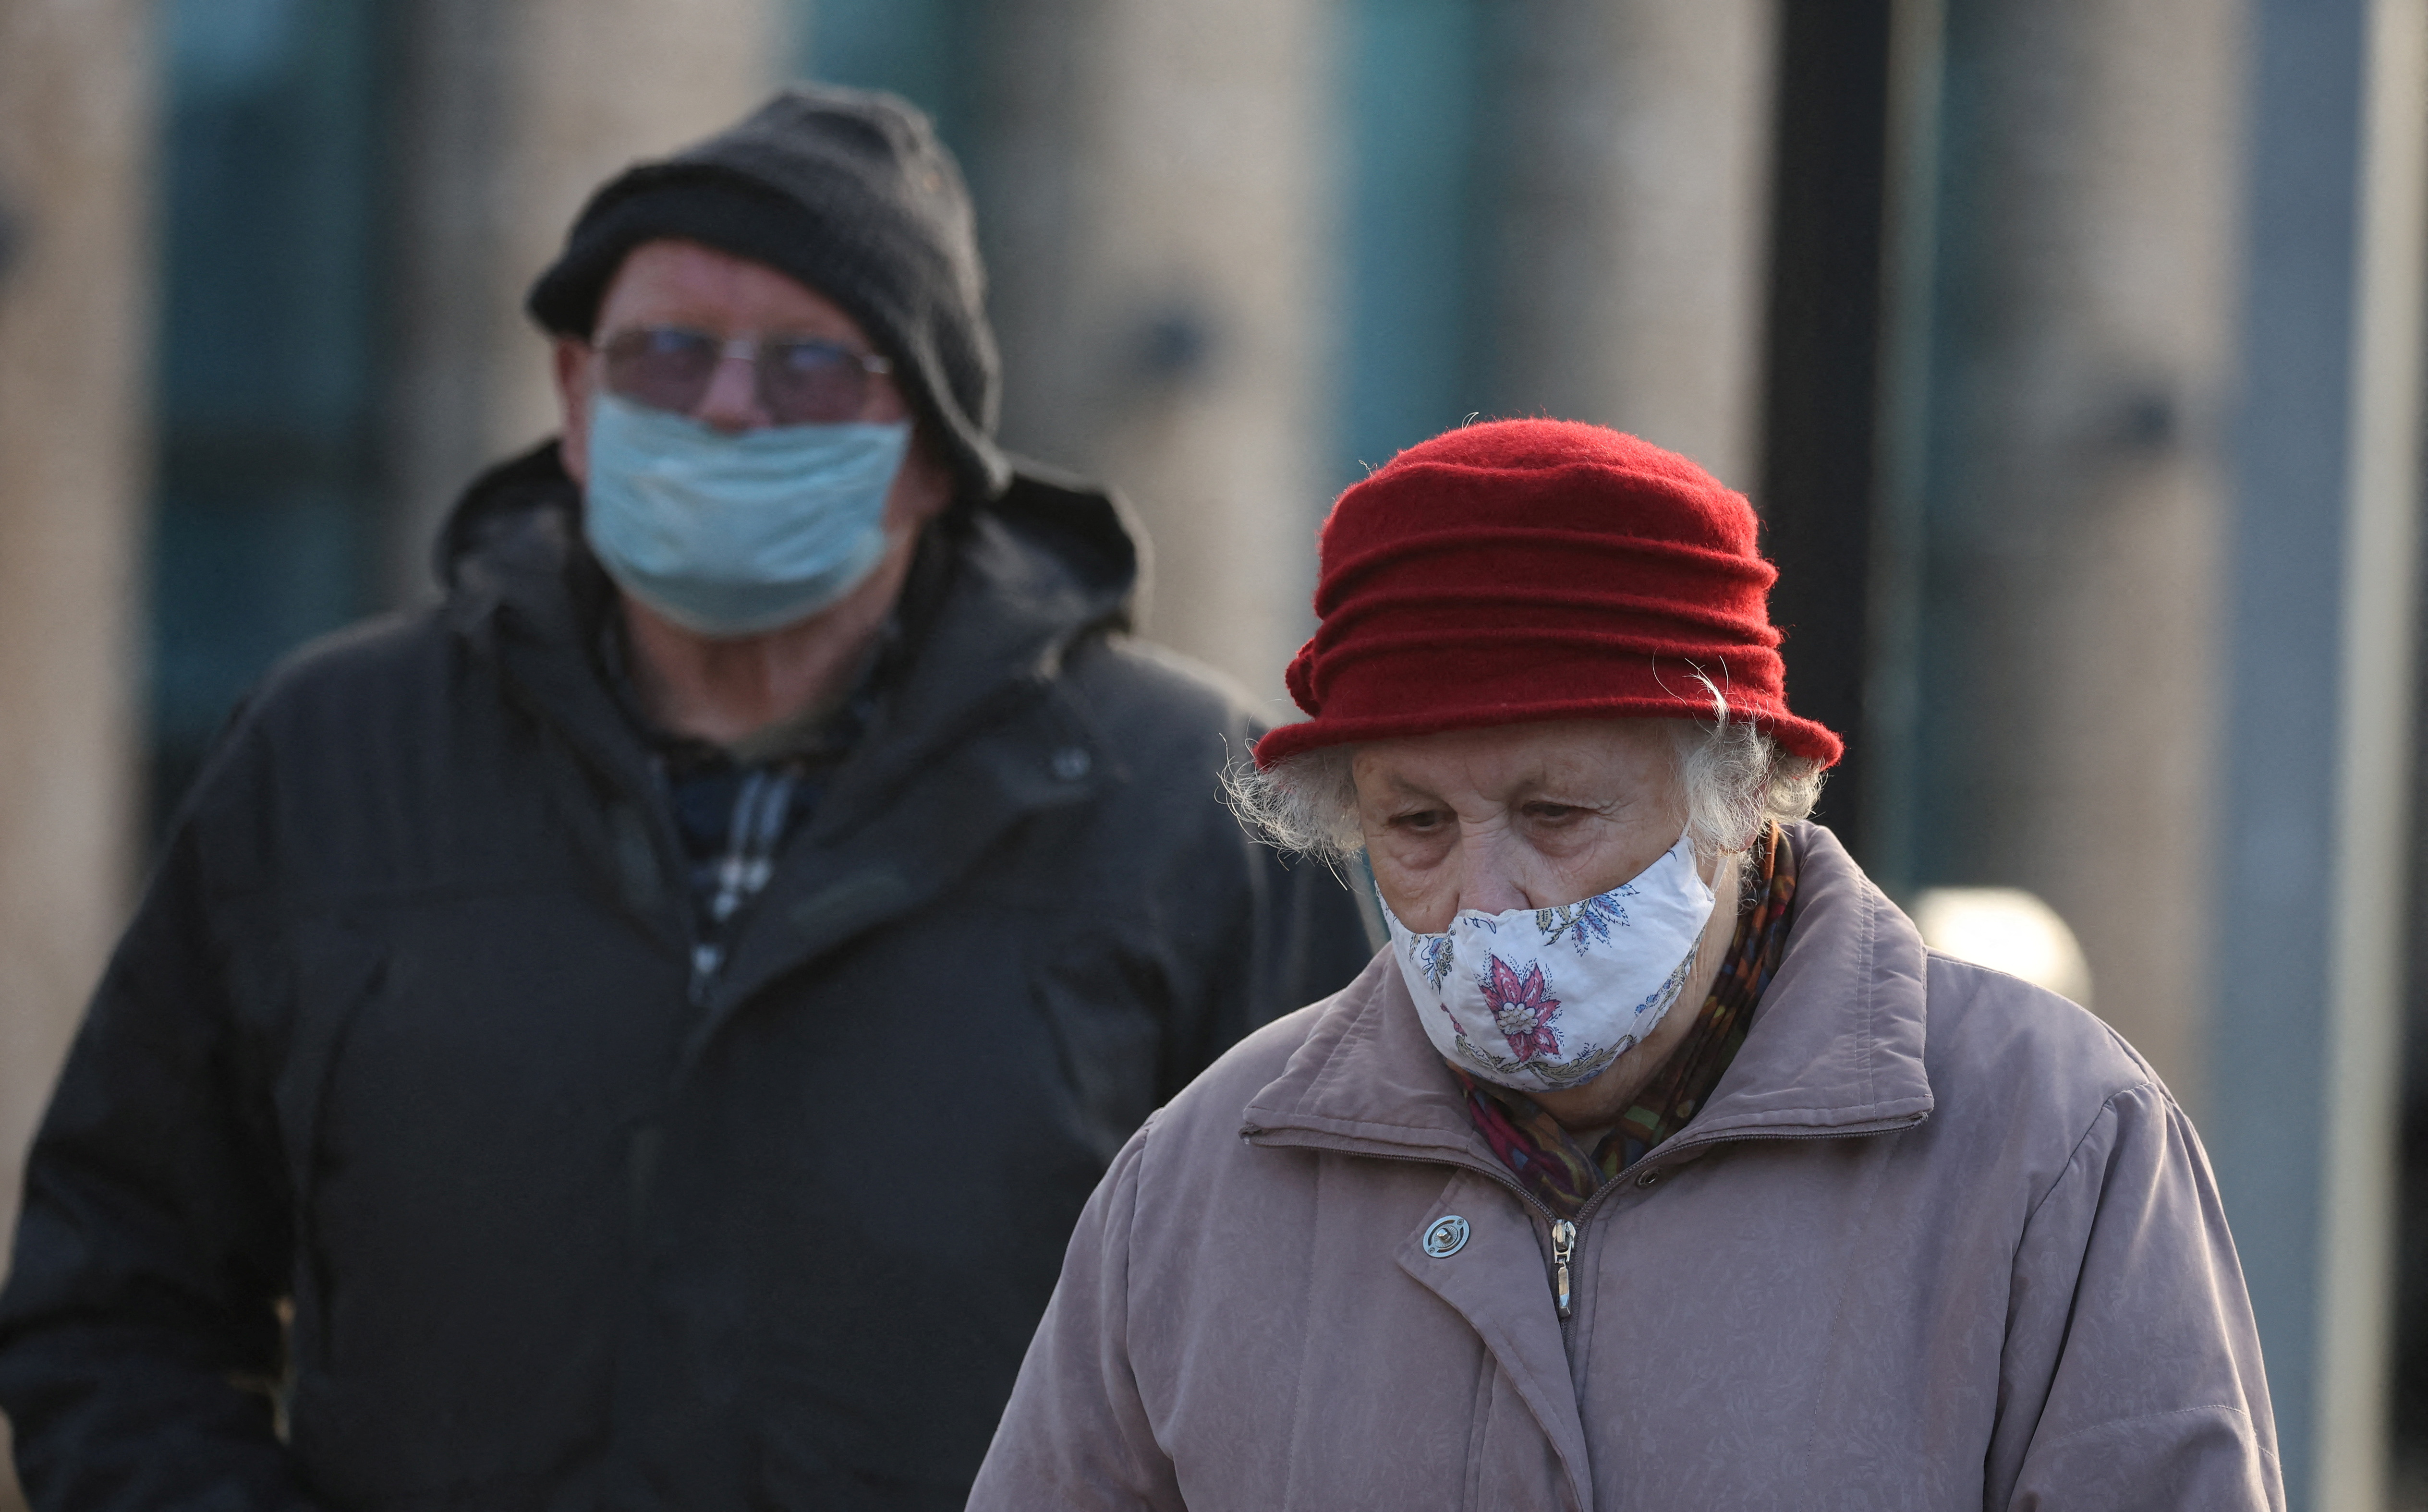 People wearing face masks walk through the town centre, amid the coronavirus disease (COVID-19) outbreak in Bolton